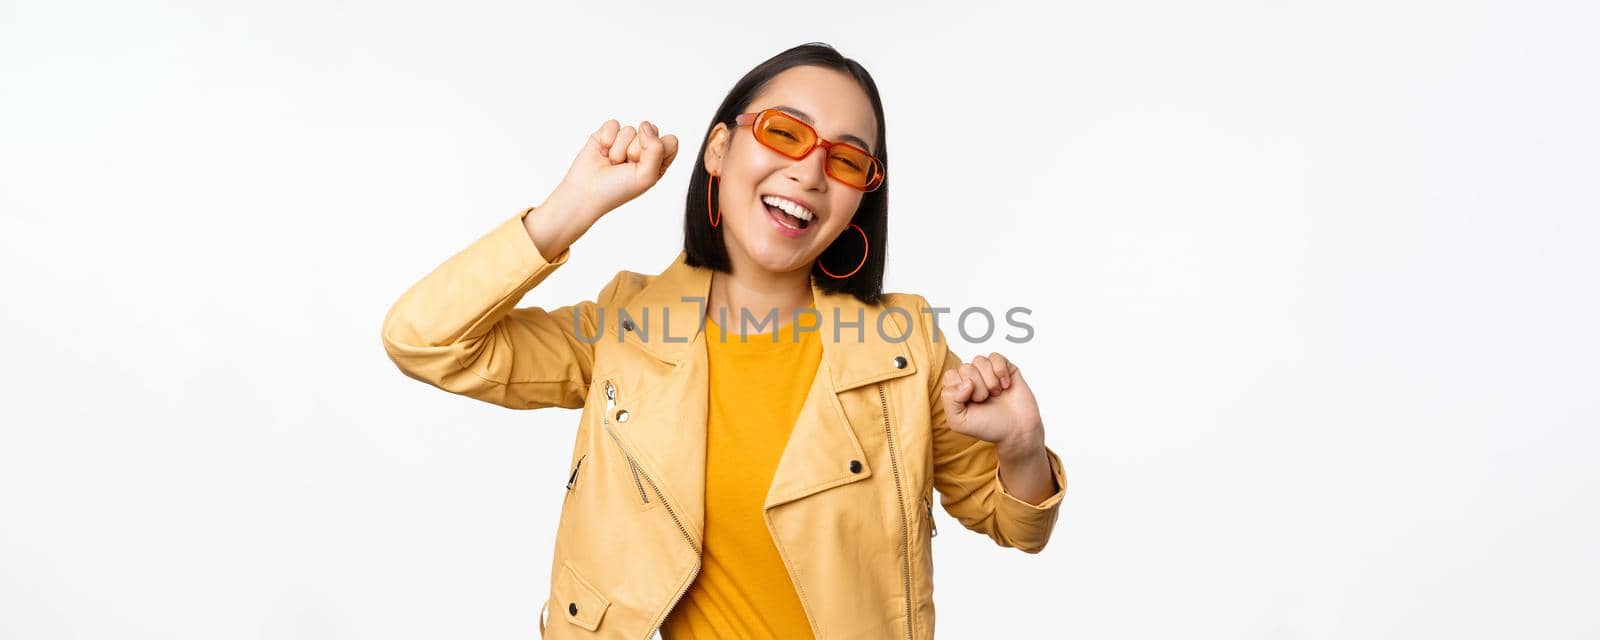 Happy stylish korean girl in sunglasses, dancing and laughing, smiling carefree, standing over white background. Copy space